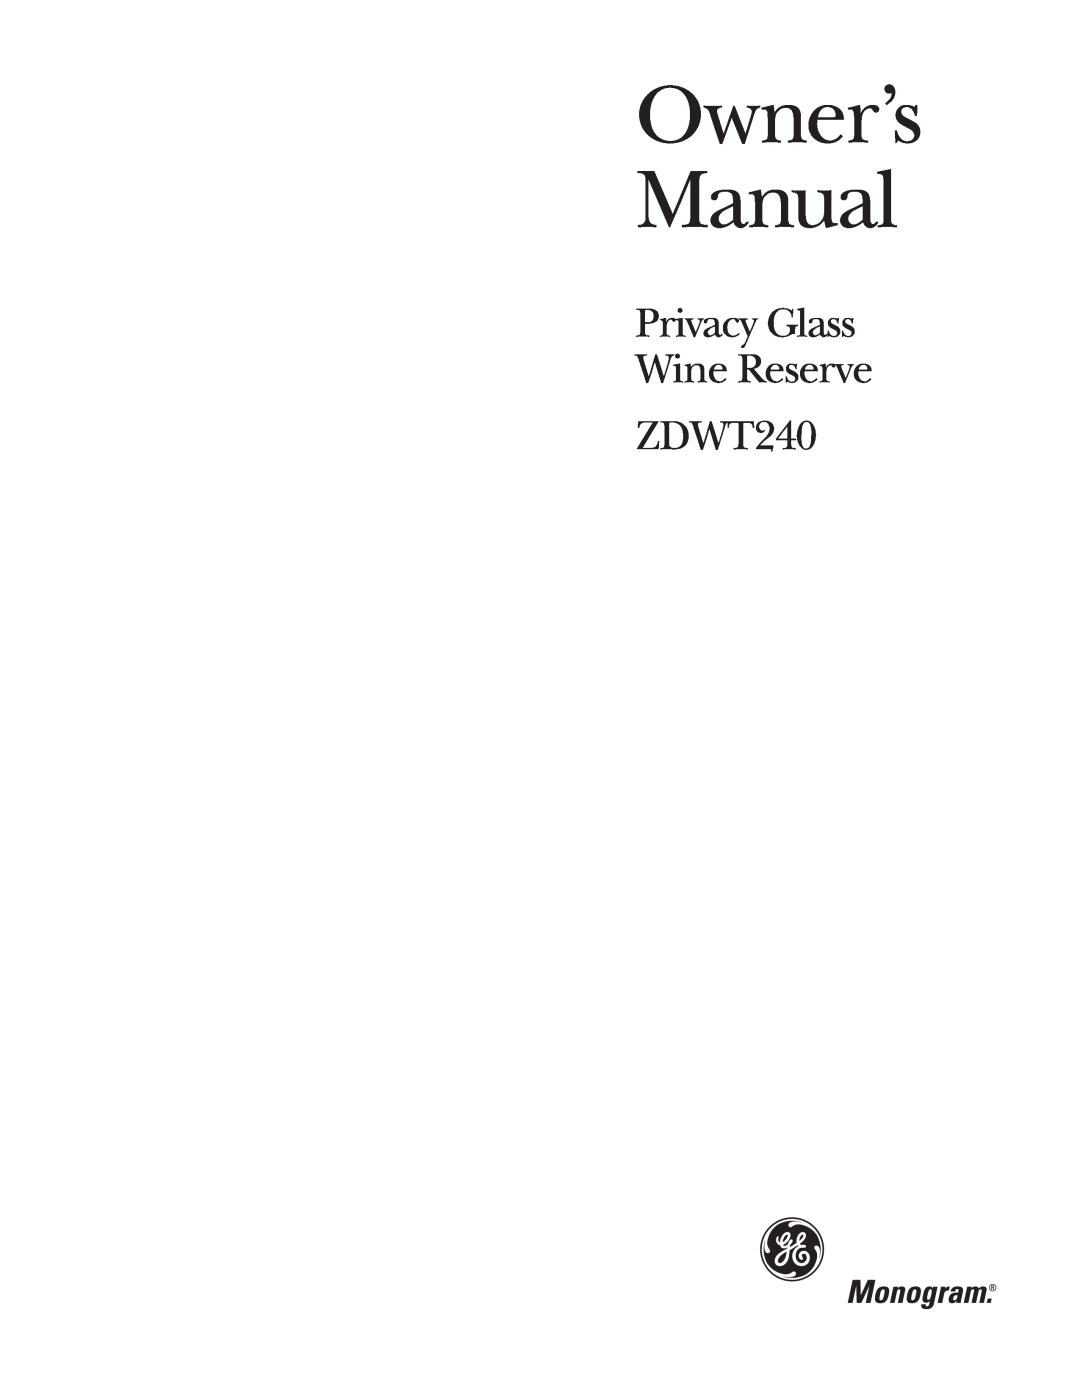 GE Monogram owner manual Privacy Glass Wine Reserve ZDWT240 